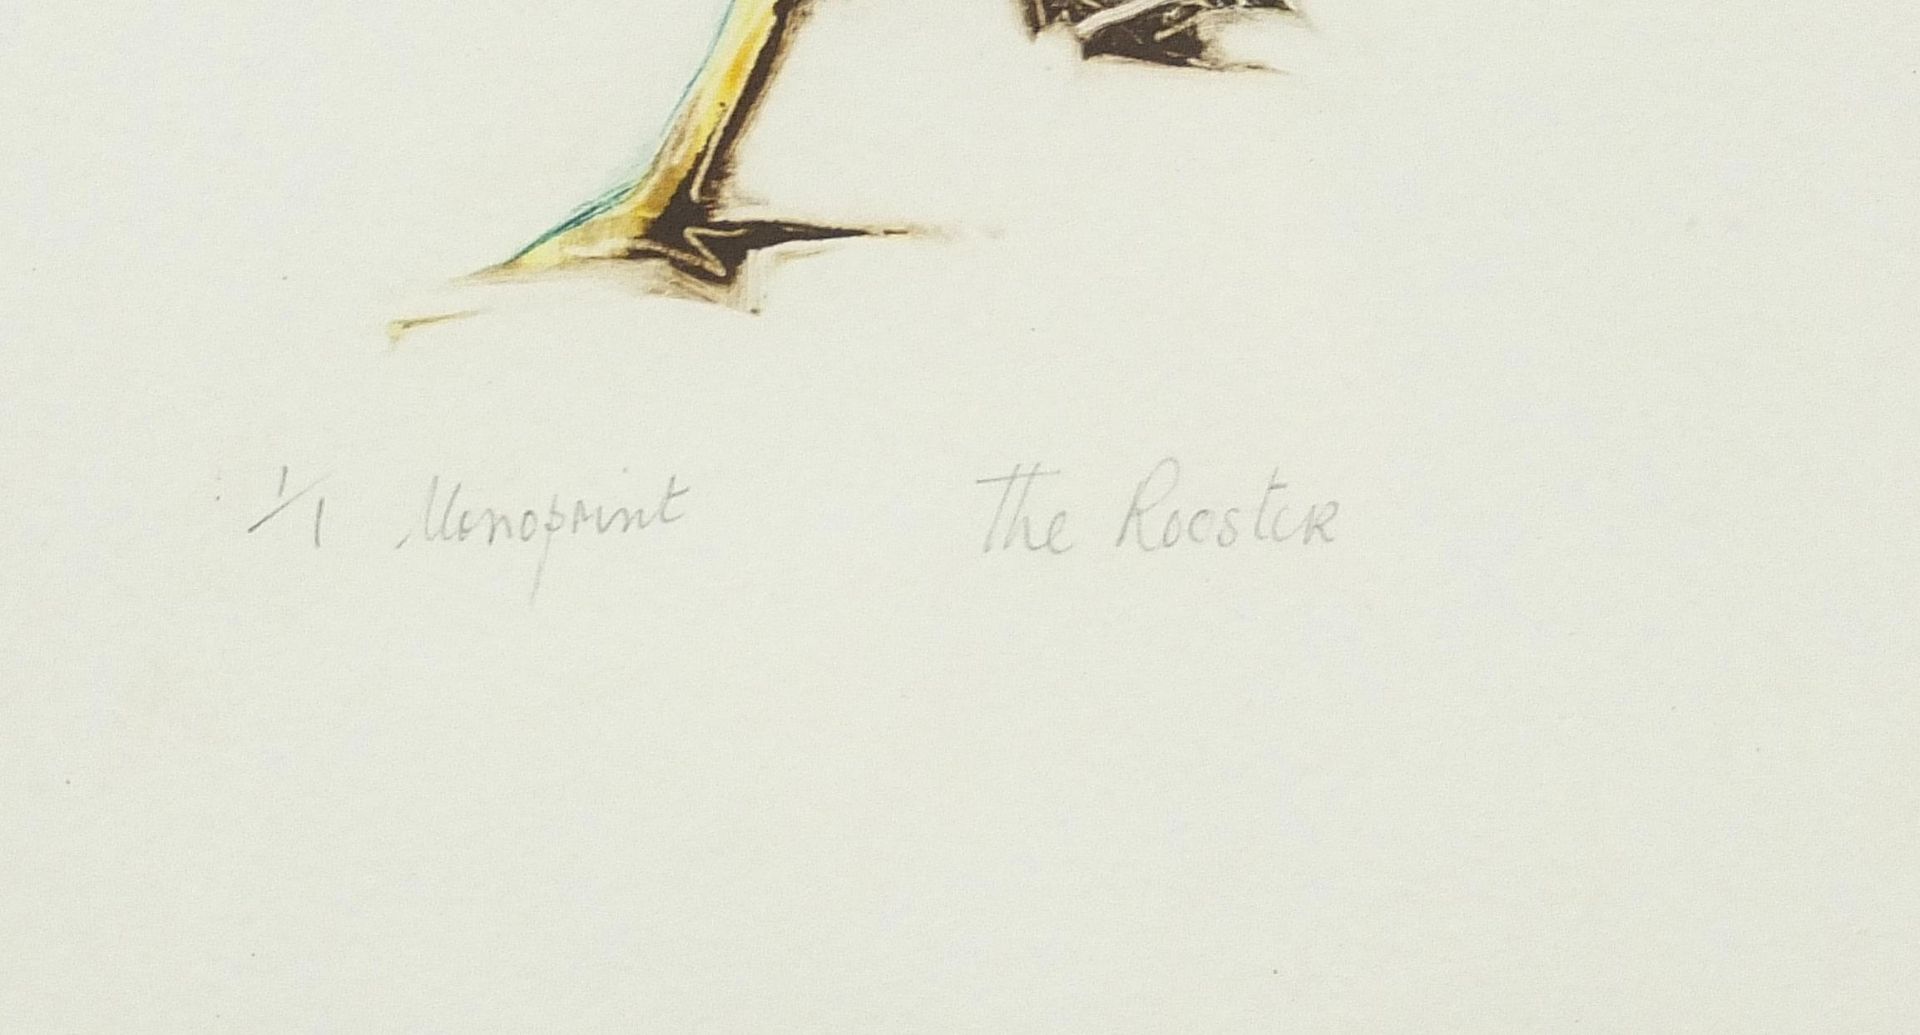 Margaret Eccleston - The rooster, pencil signed monoprint in colour, limited edition 1/1, mounted, - Image 3 of 7